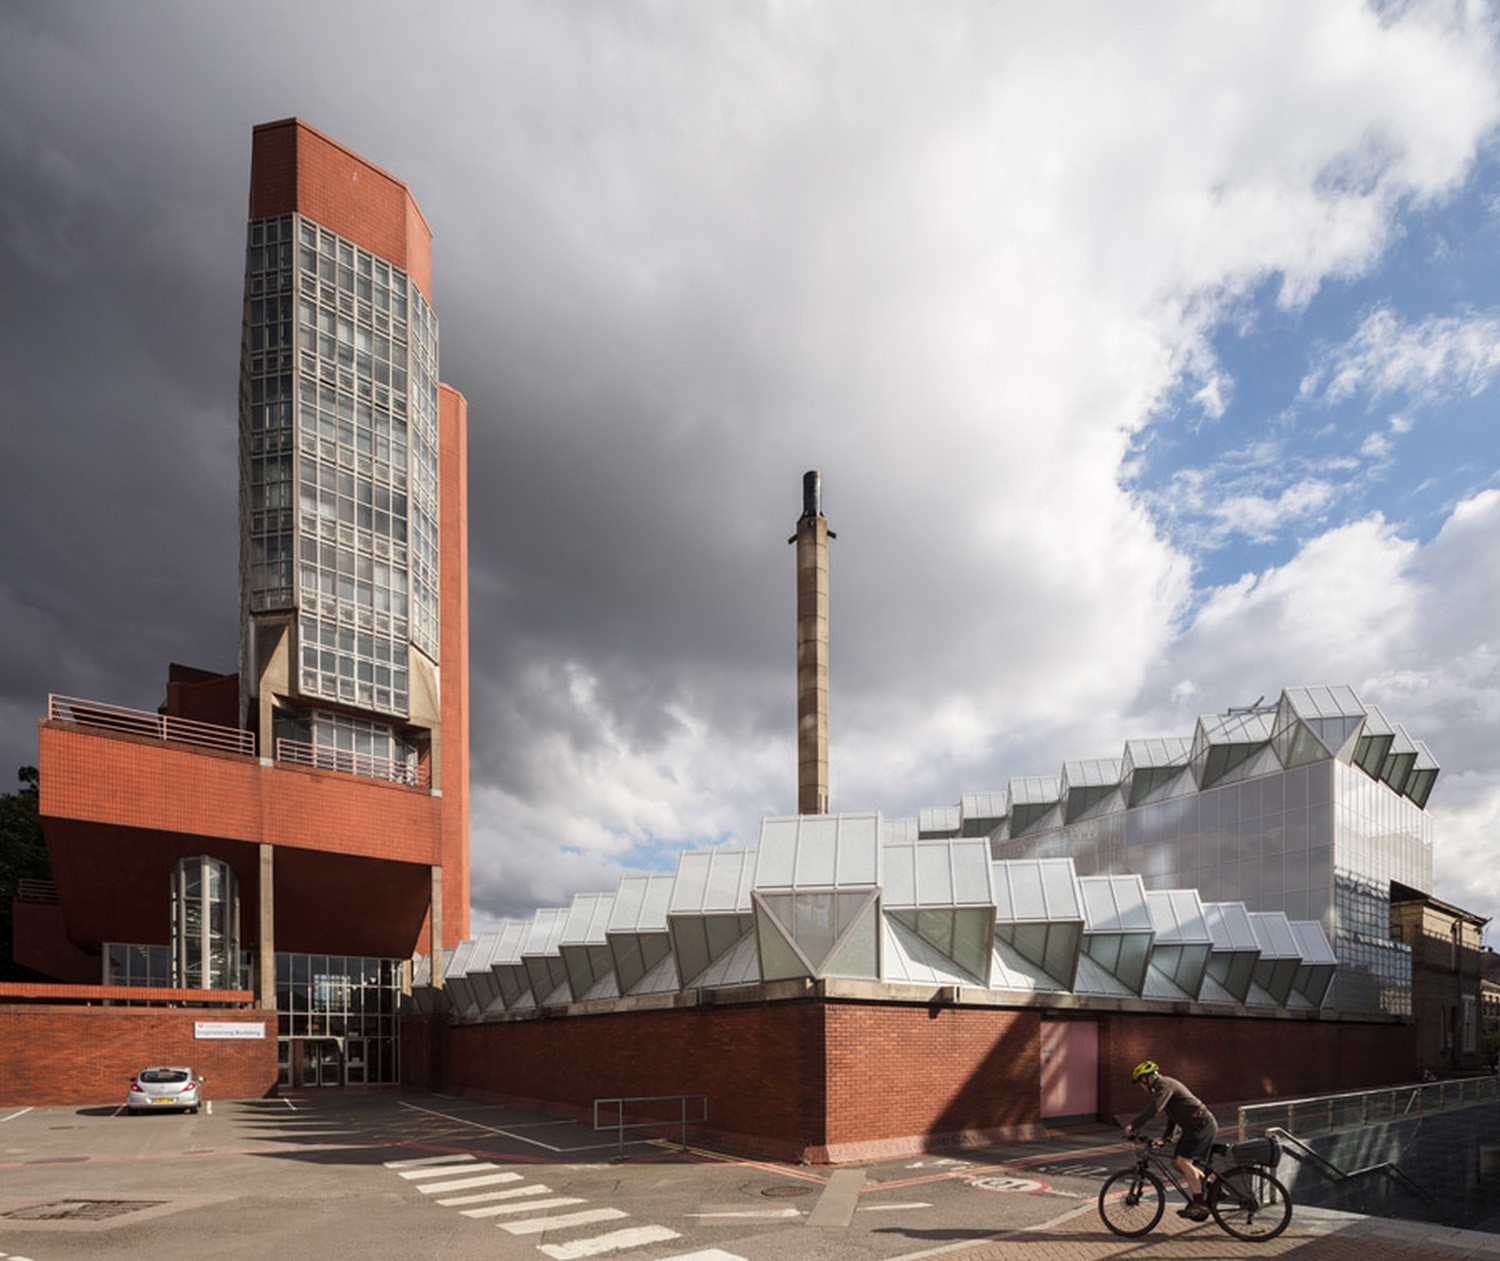 External view of the Engineering Building tower and workshops. Copyright: All images copyright University of Leicester (photographer Simon Kennedy)